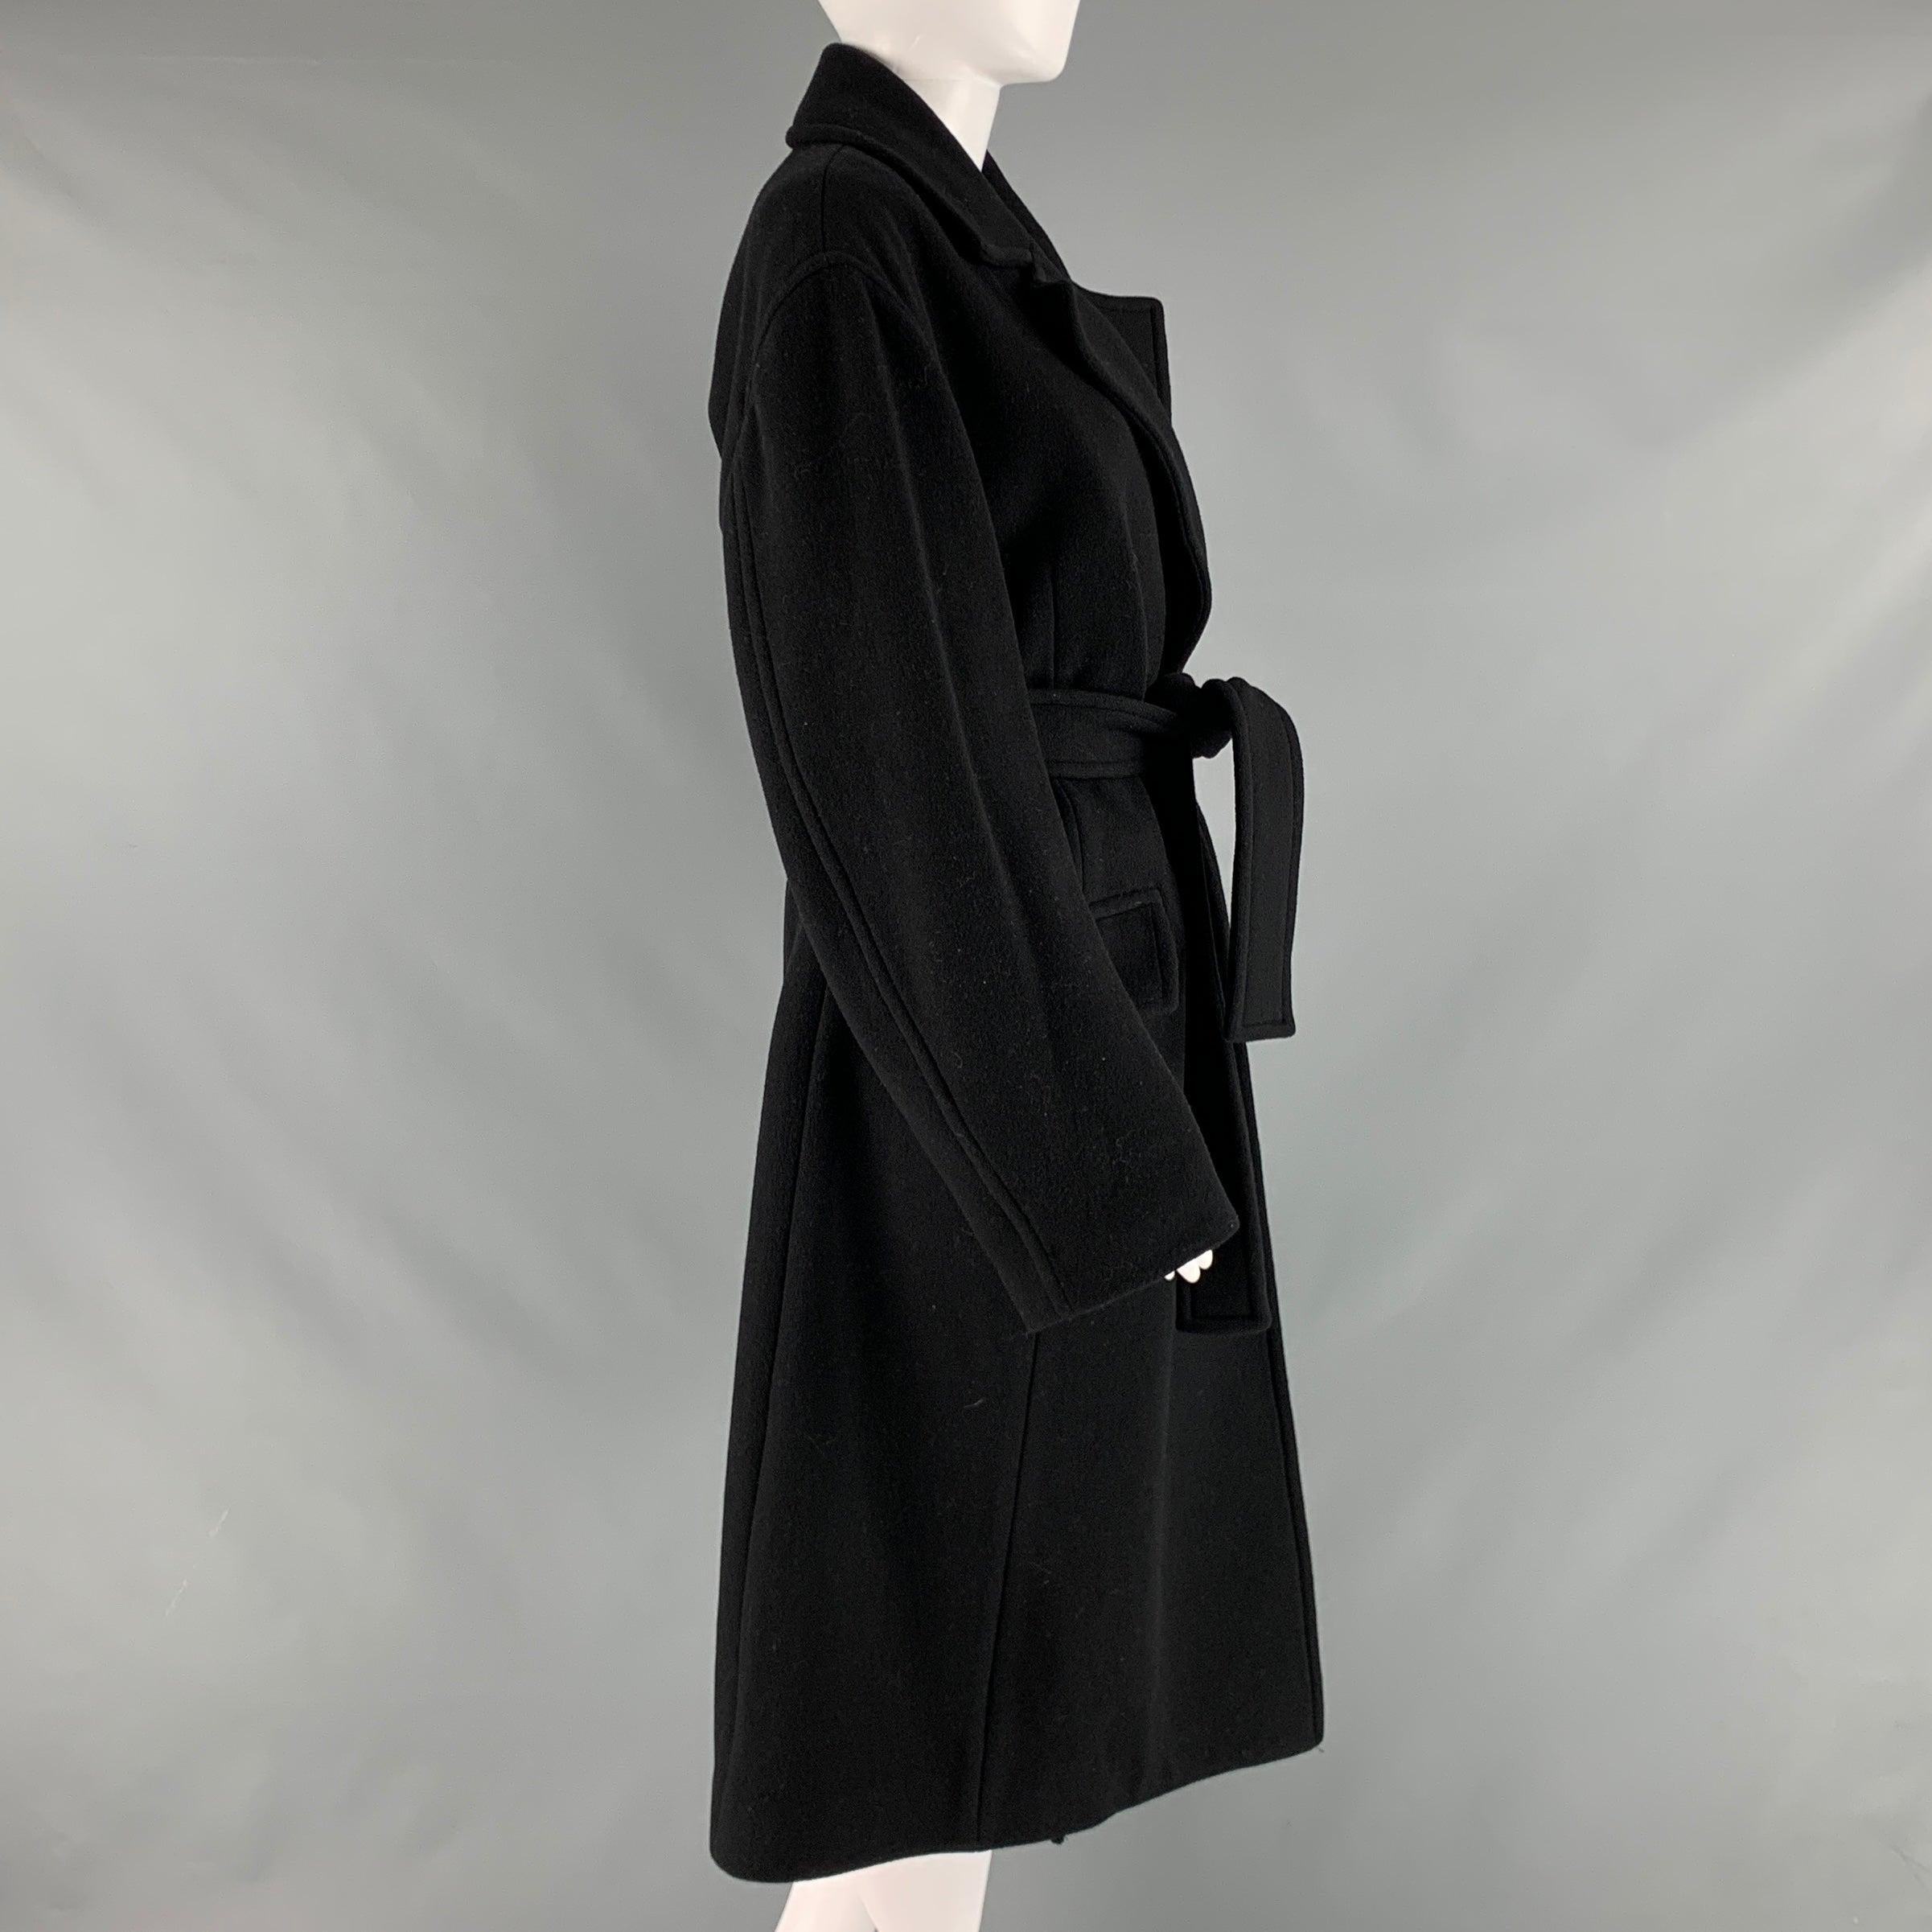 THEORY Size L Black Wool Blend Solid Notch Lapel Coat In Good Condition For Sale In San Francisco, CA